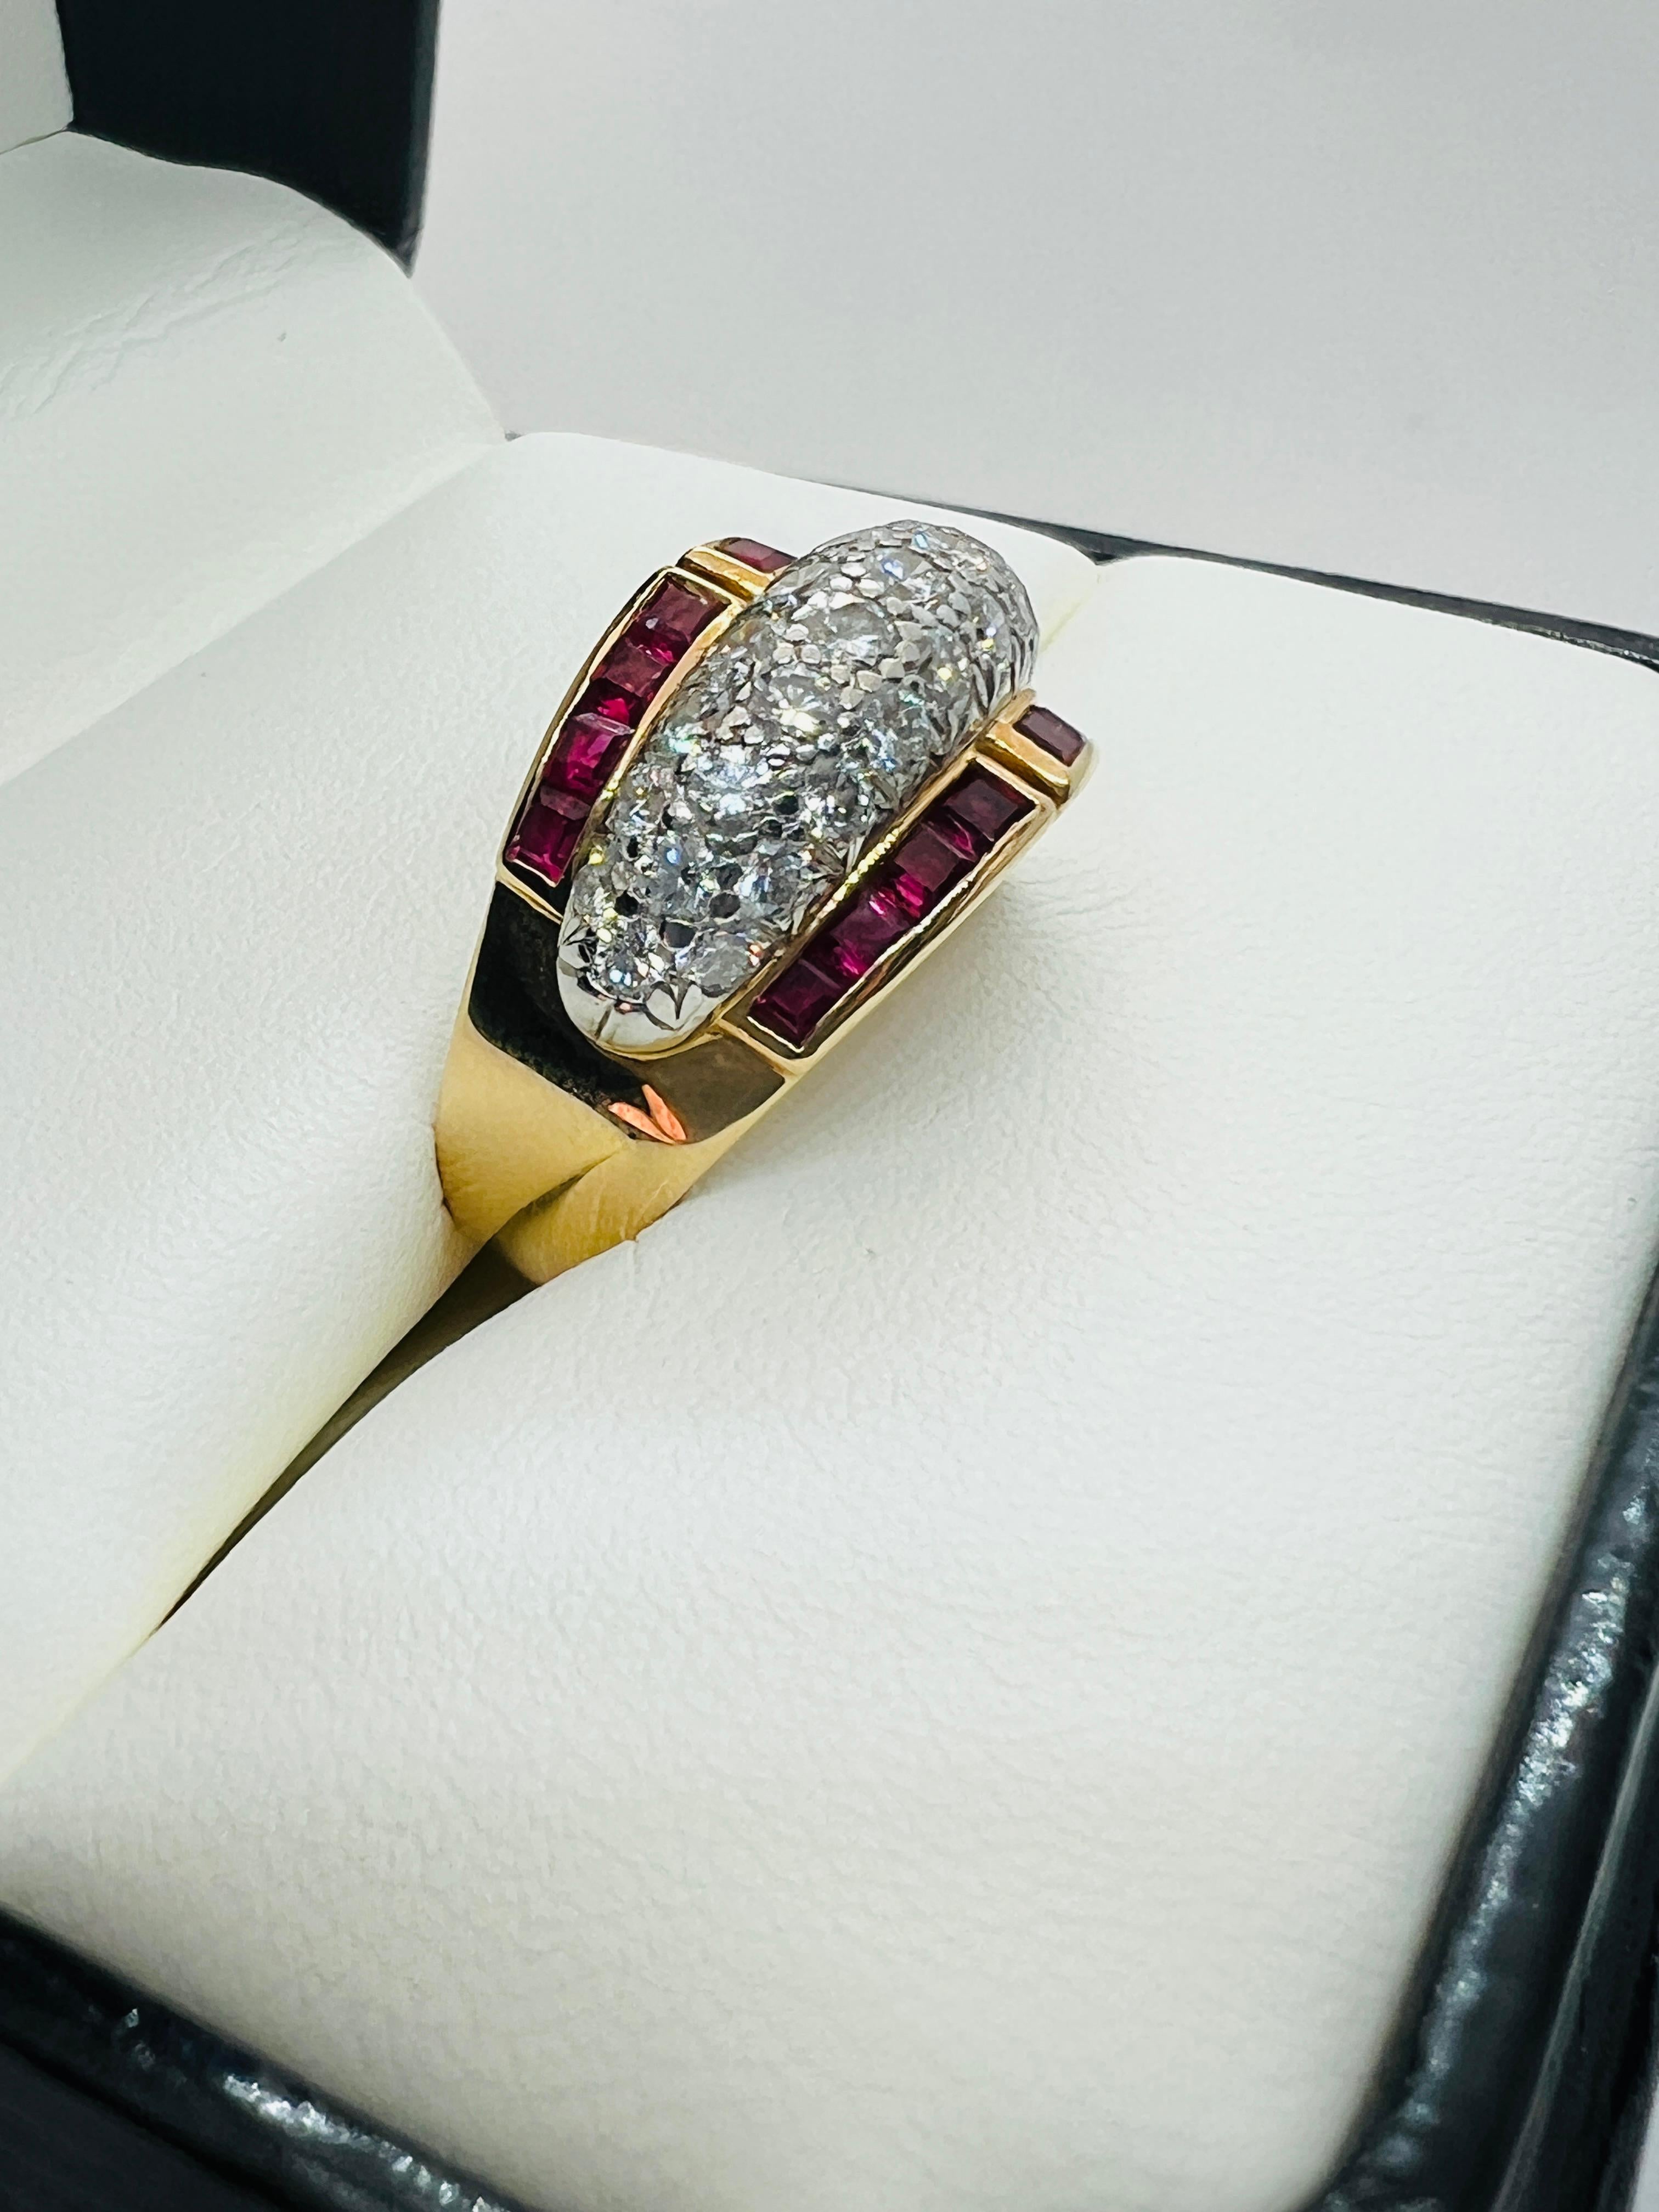 Oscar He-man Brothers Retro 18K Yellow Gold & Platinum Diamond & Ruby Ring  In Excellent Condition For Sale In Birmingham, AL